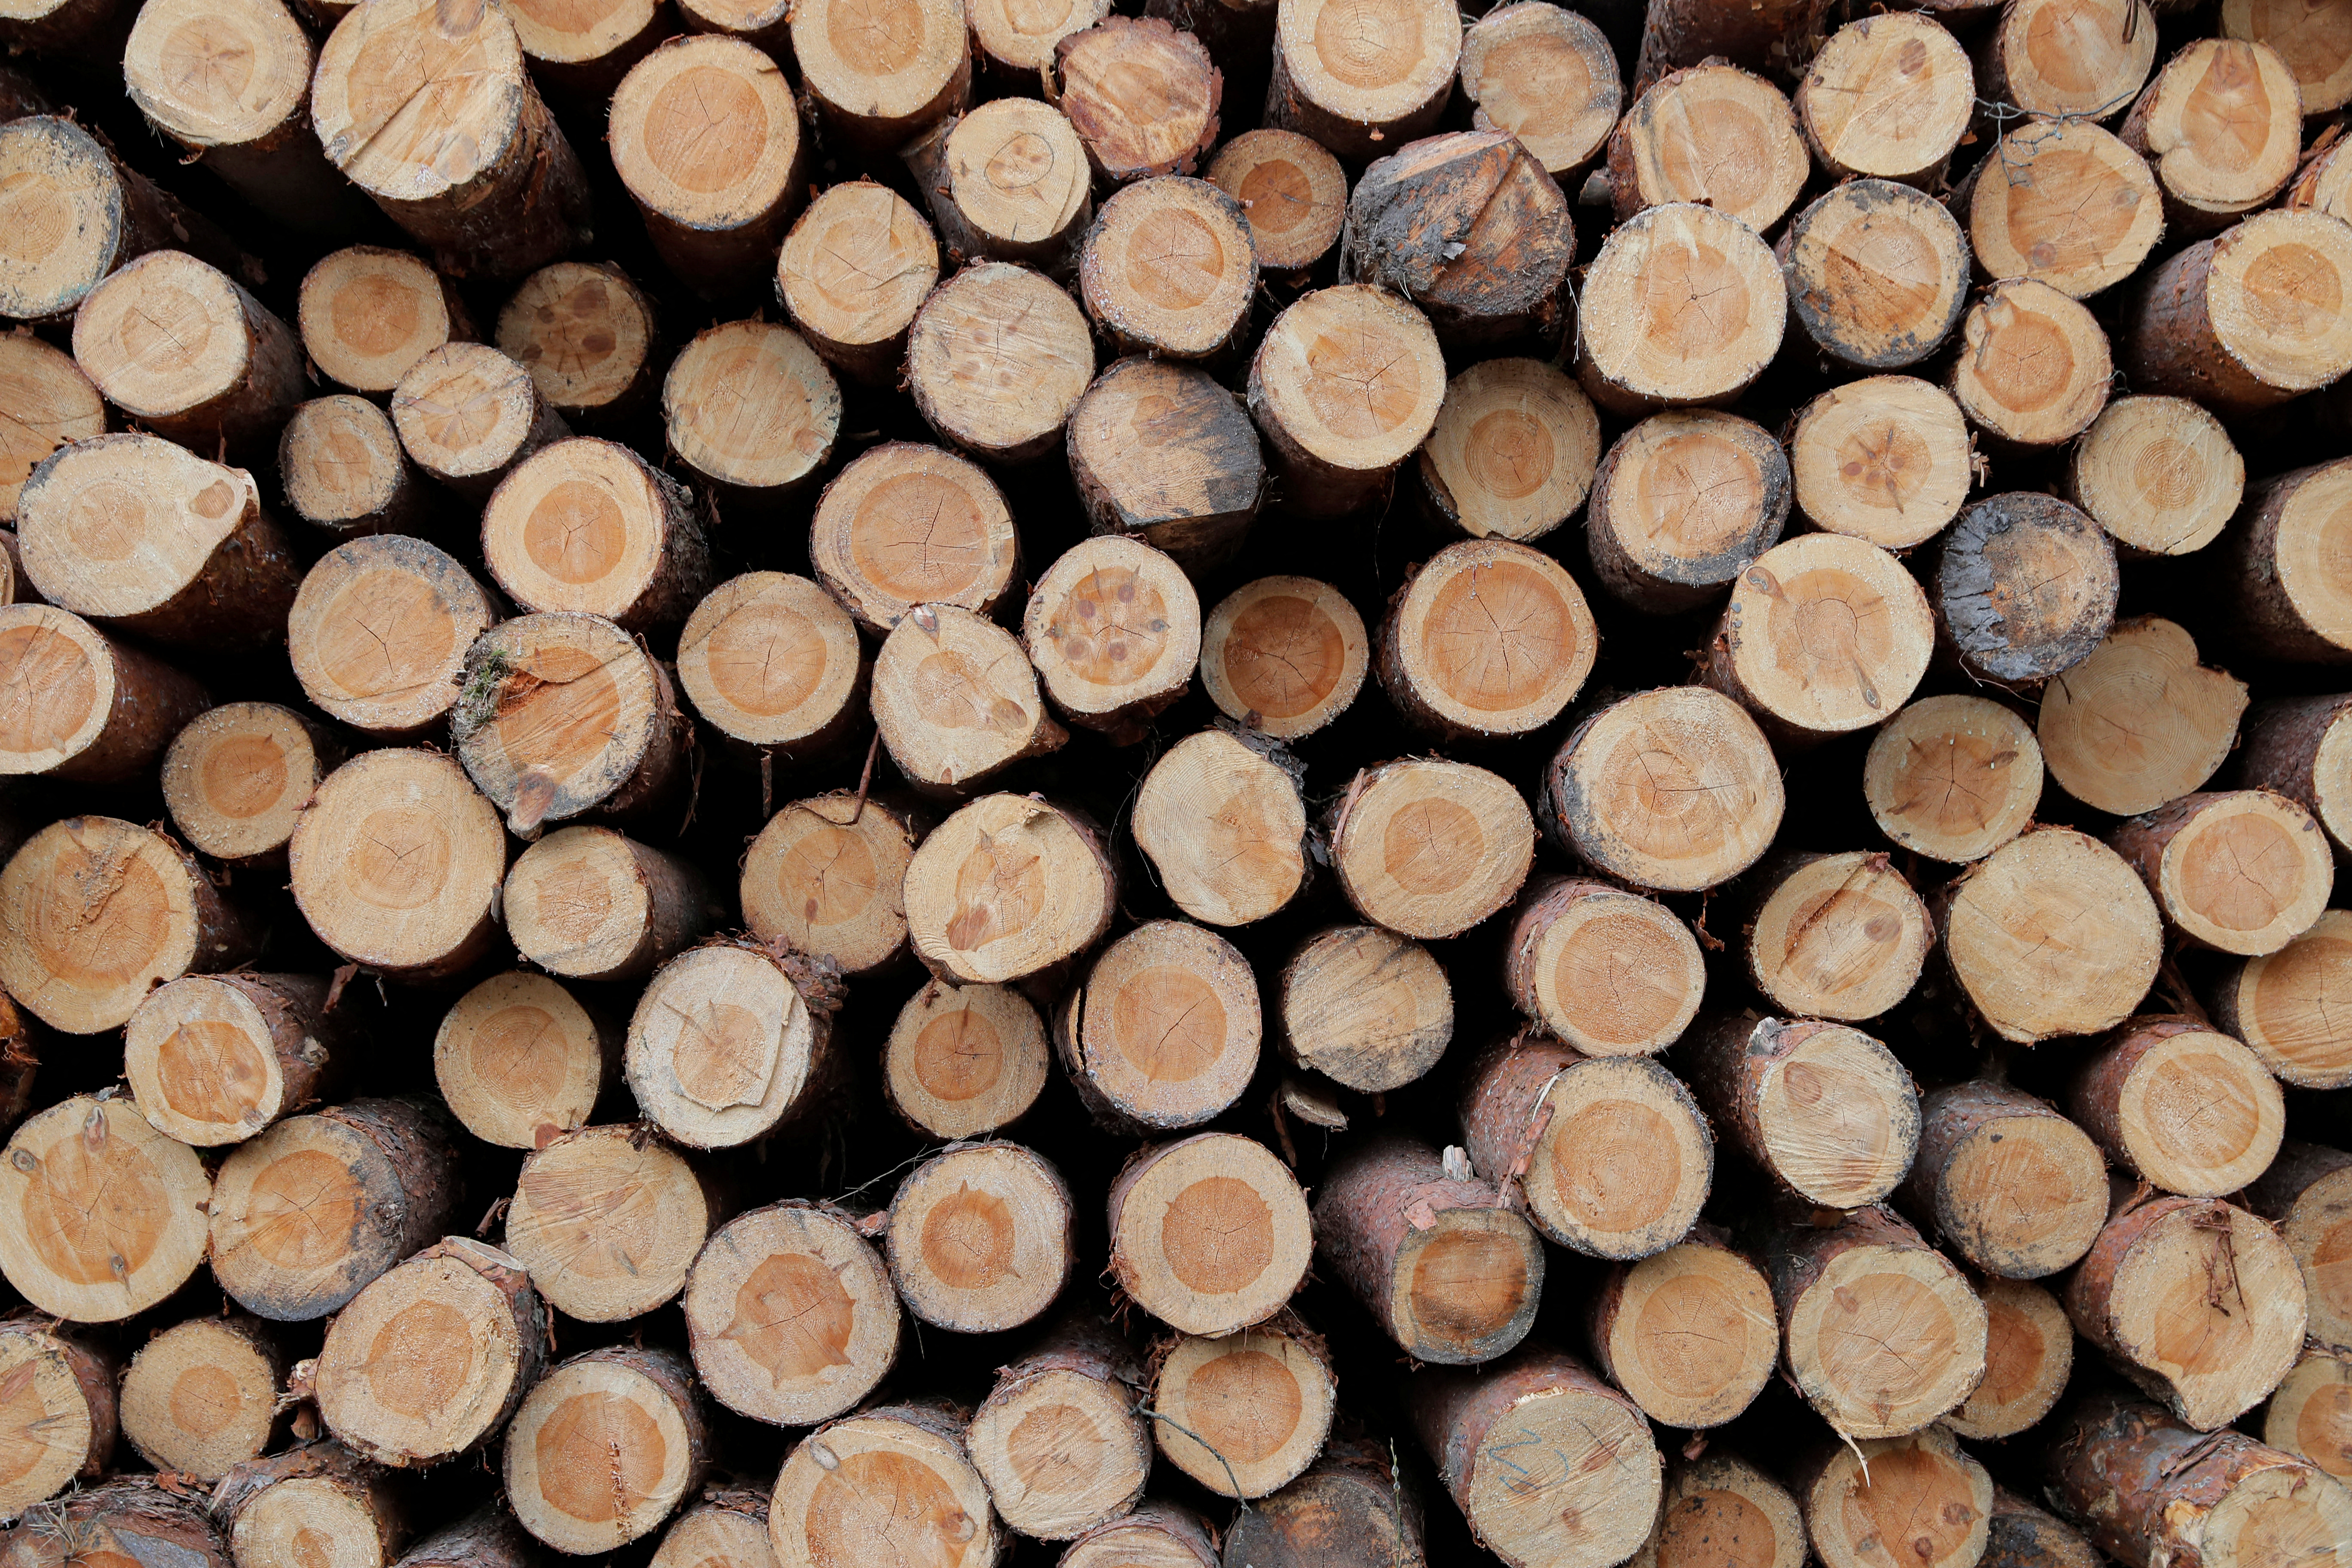 Stacked logs are seen in a forest near the village of Barsuki, Belarus April 21, 2020.  REUTERS/Vasily Fedosenko